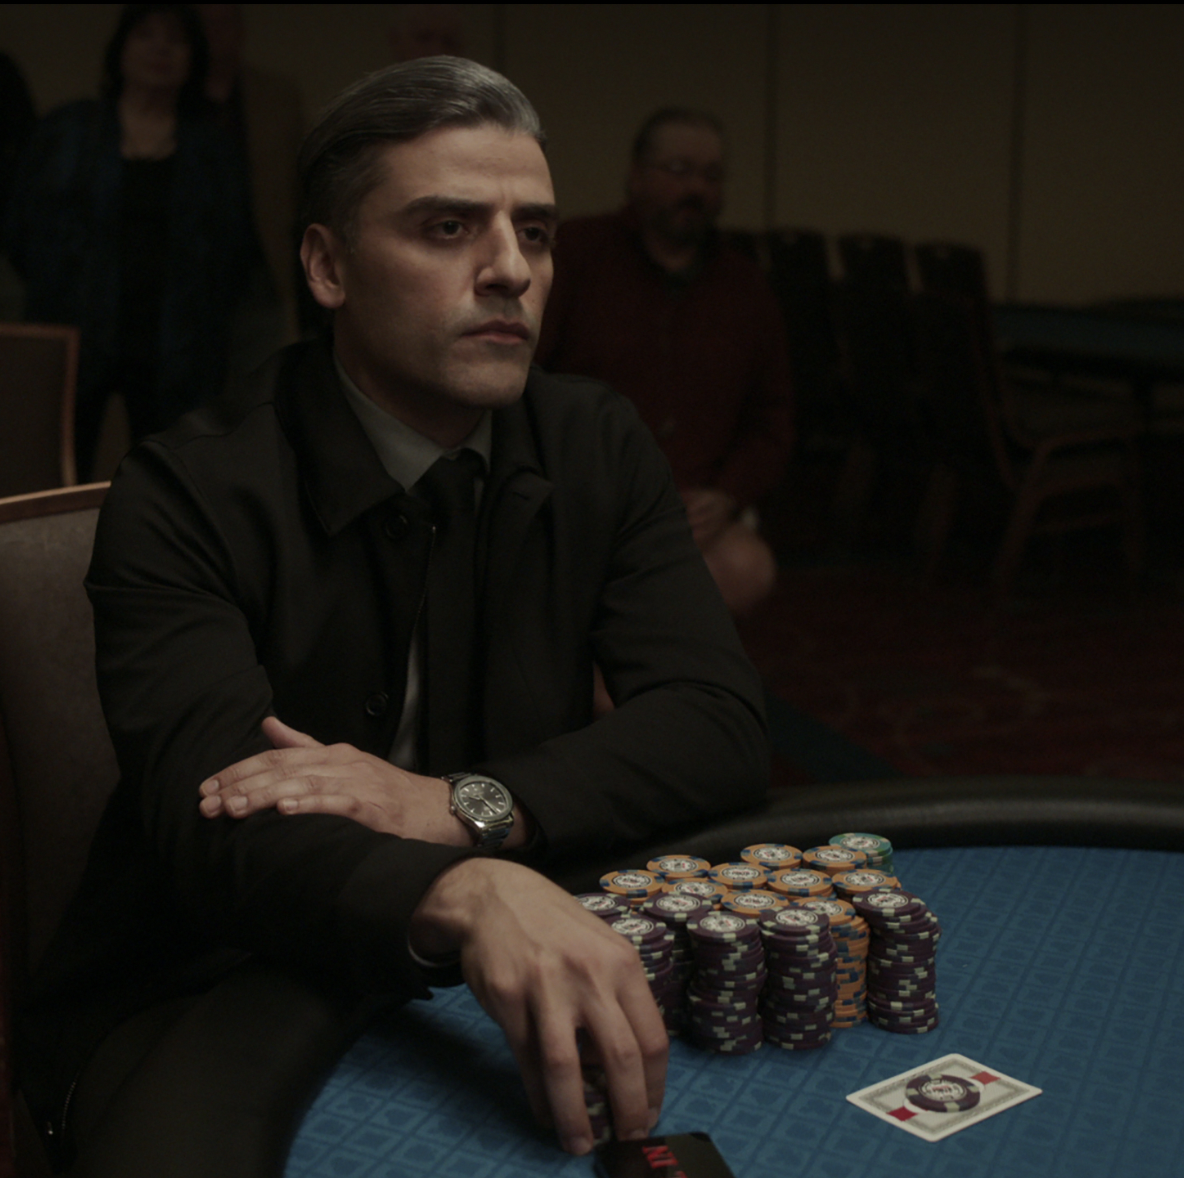 The 20 Best Gambling Movies to Watch if You're Feeling Lucky